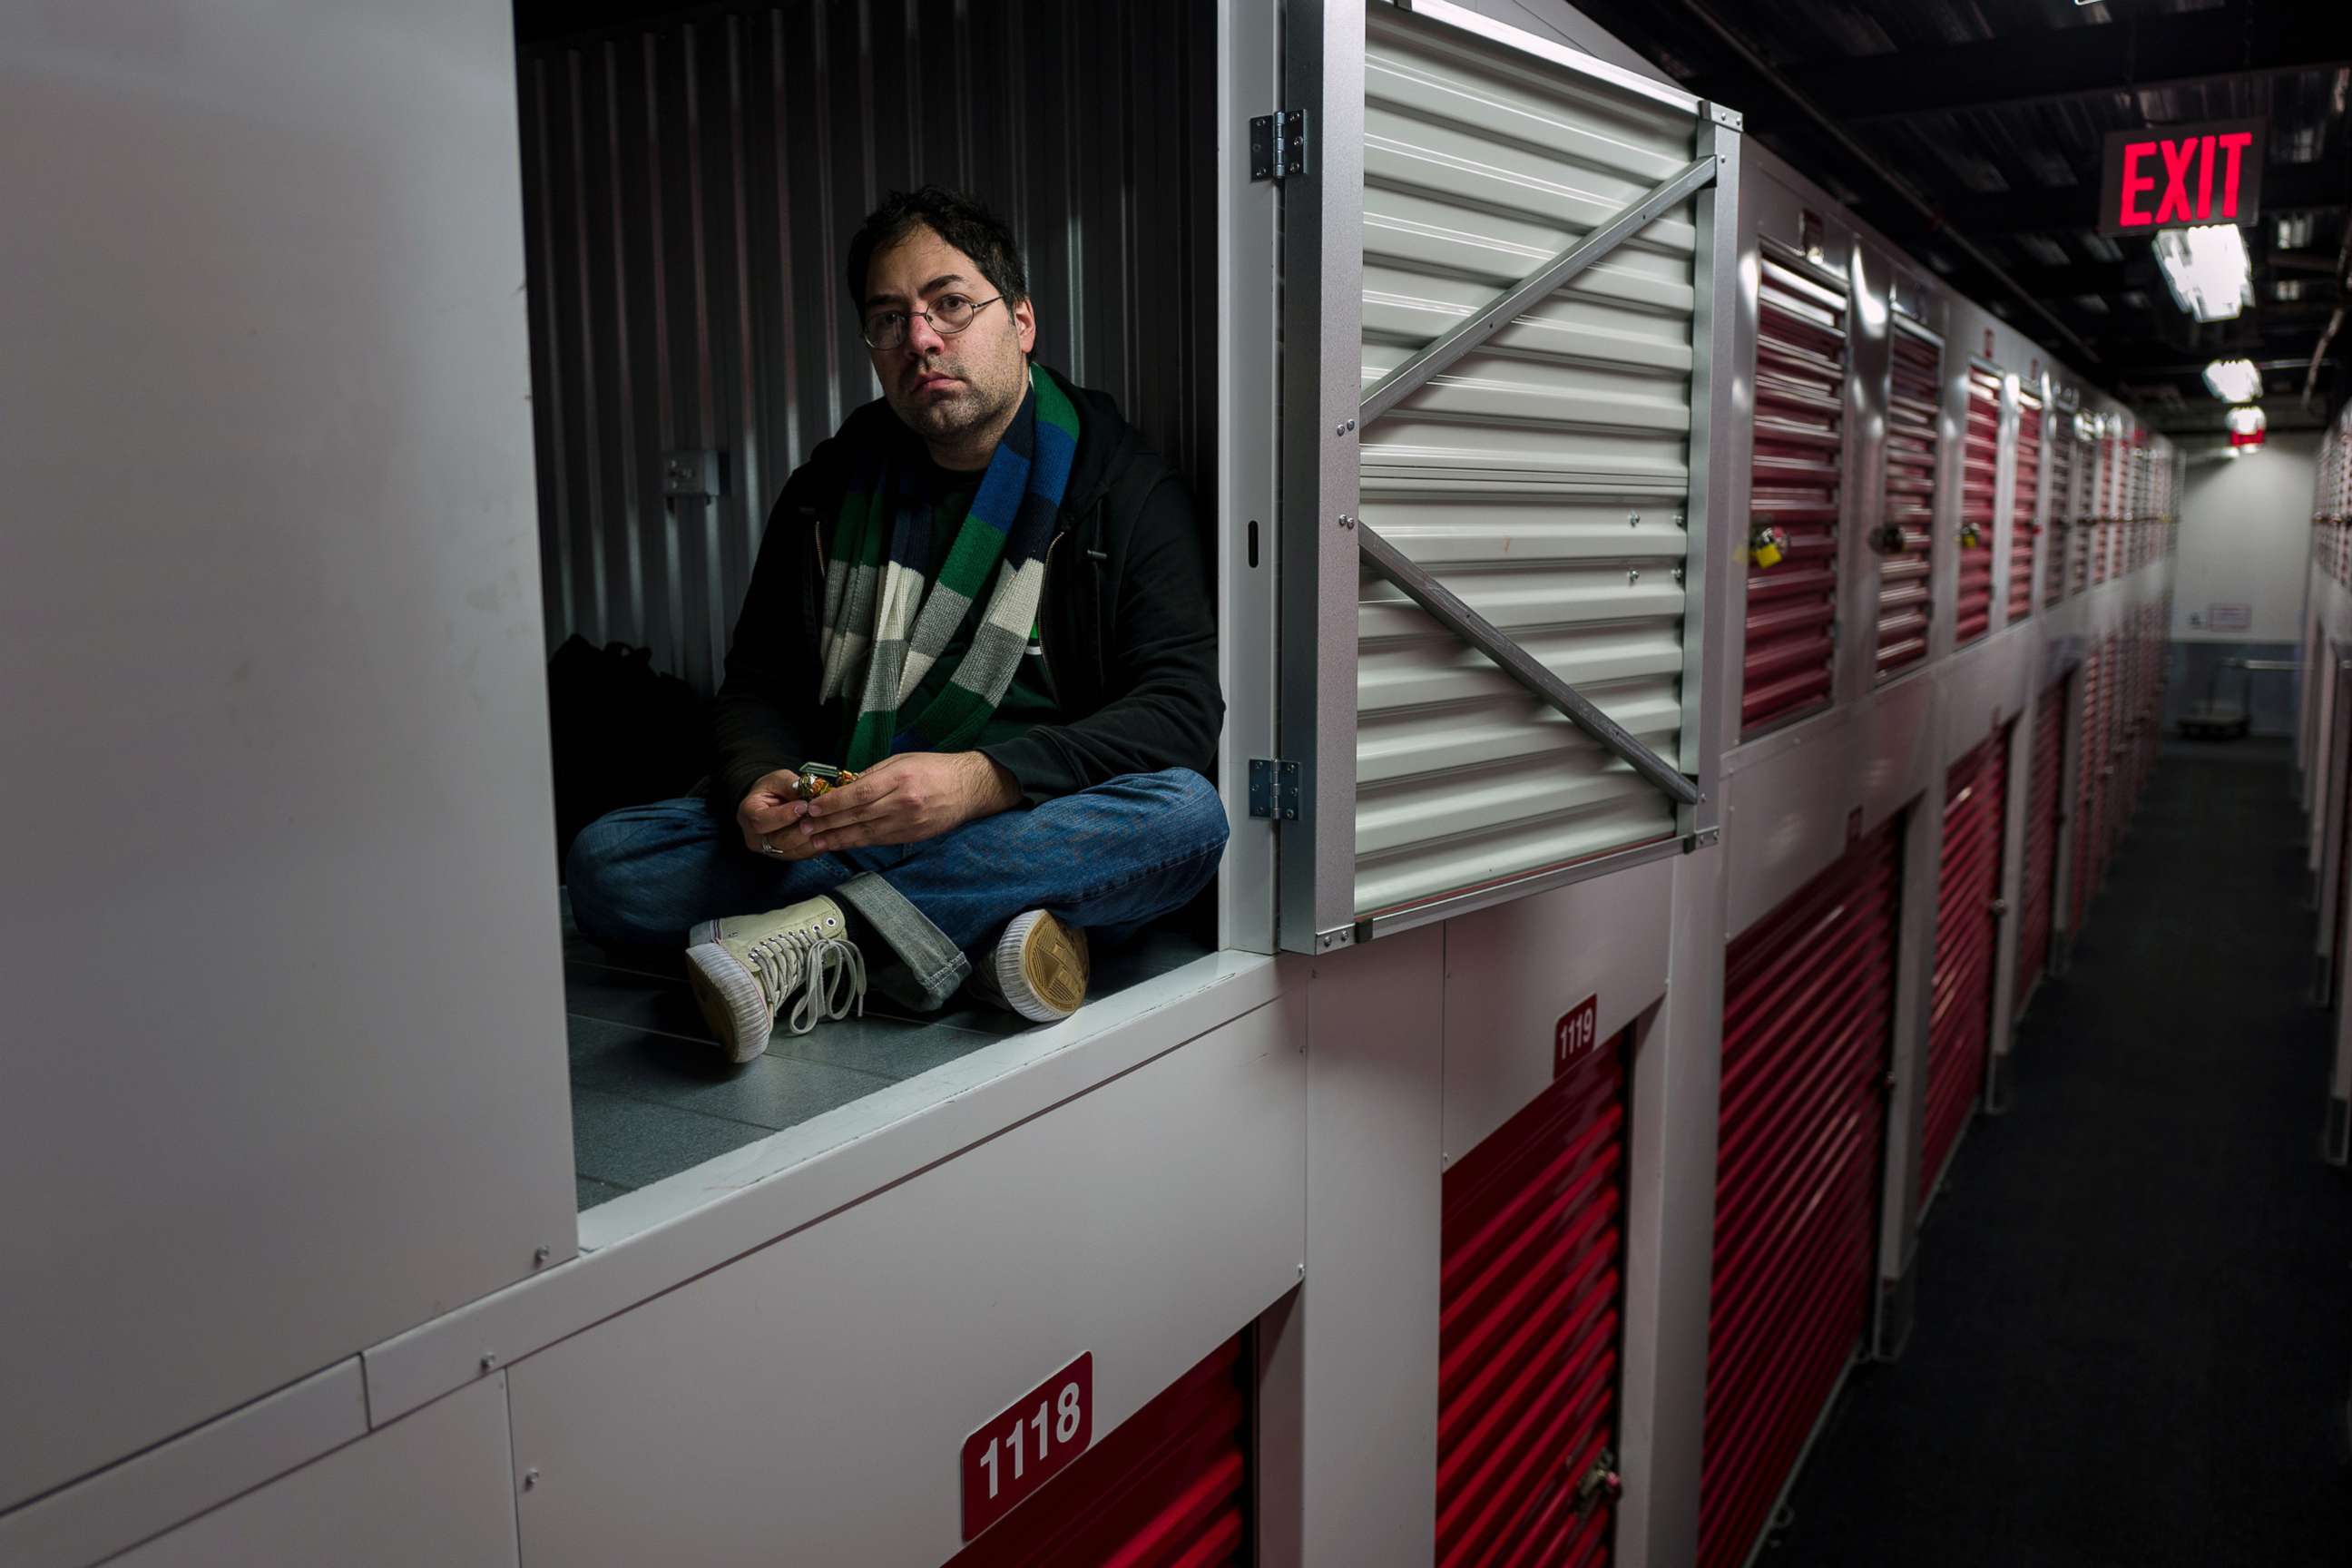 PHOTO: Christian Cascone in the storage space that he rents in New York, where he spends most days because of a risk of infection at the Bronx homeless shelter where he sleeps, on April 11, 2020.